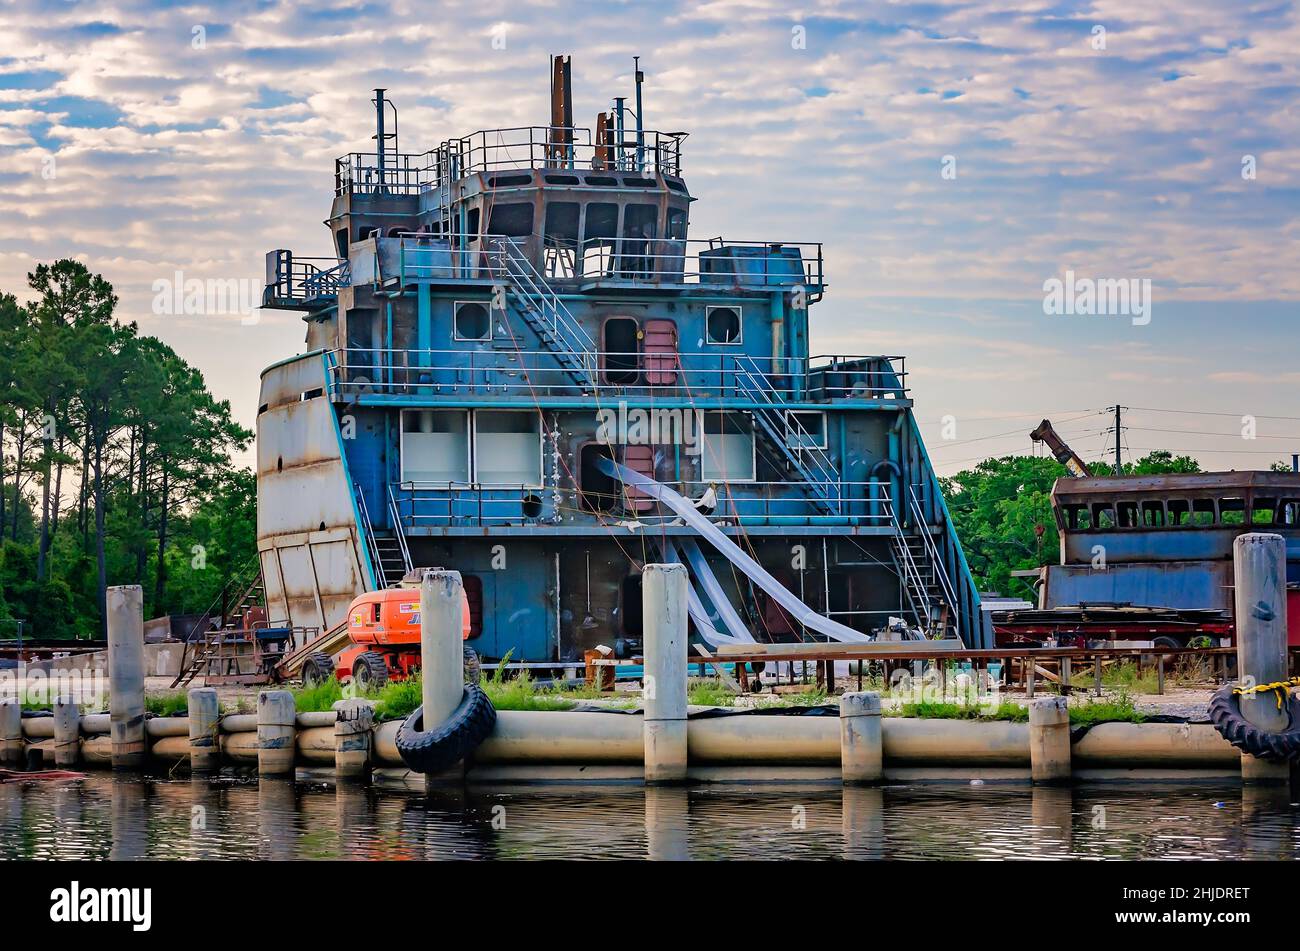 A cross-section of a ship is pictured while under construction, May 2, 2014, in Bayou La Batre, Alabama. Stock Photo